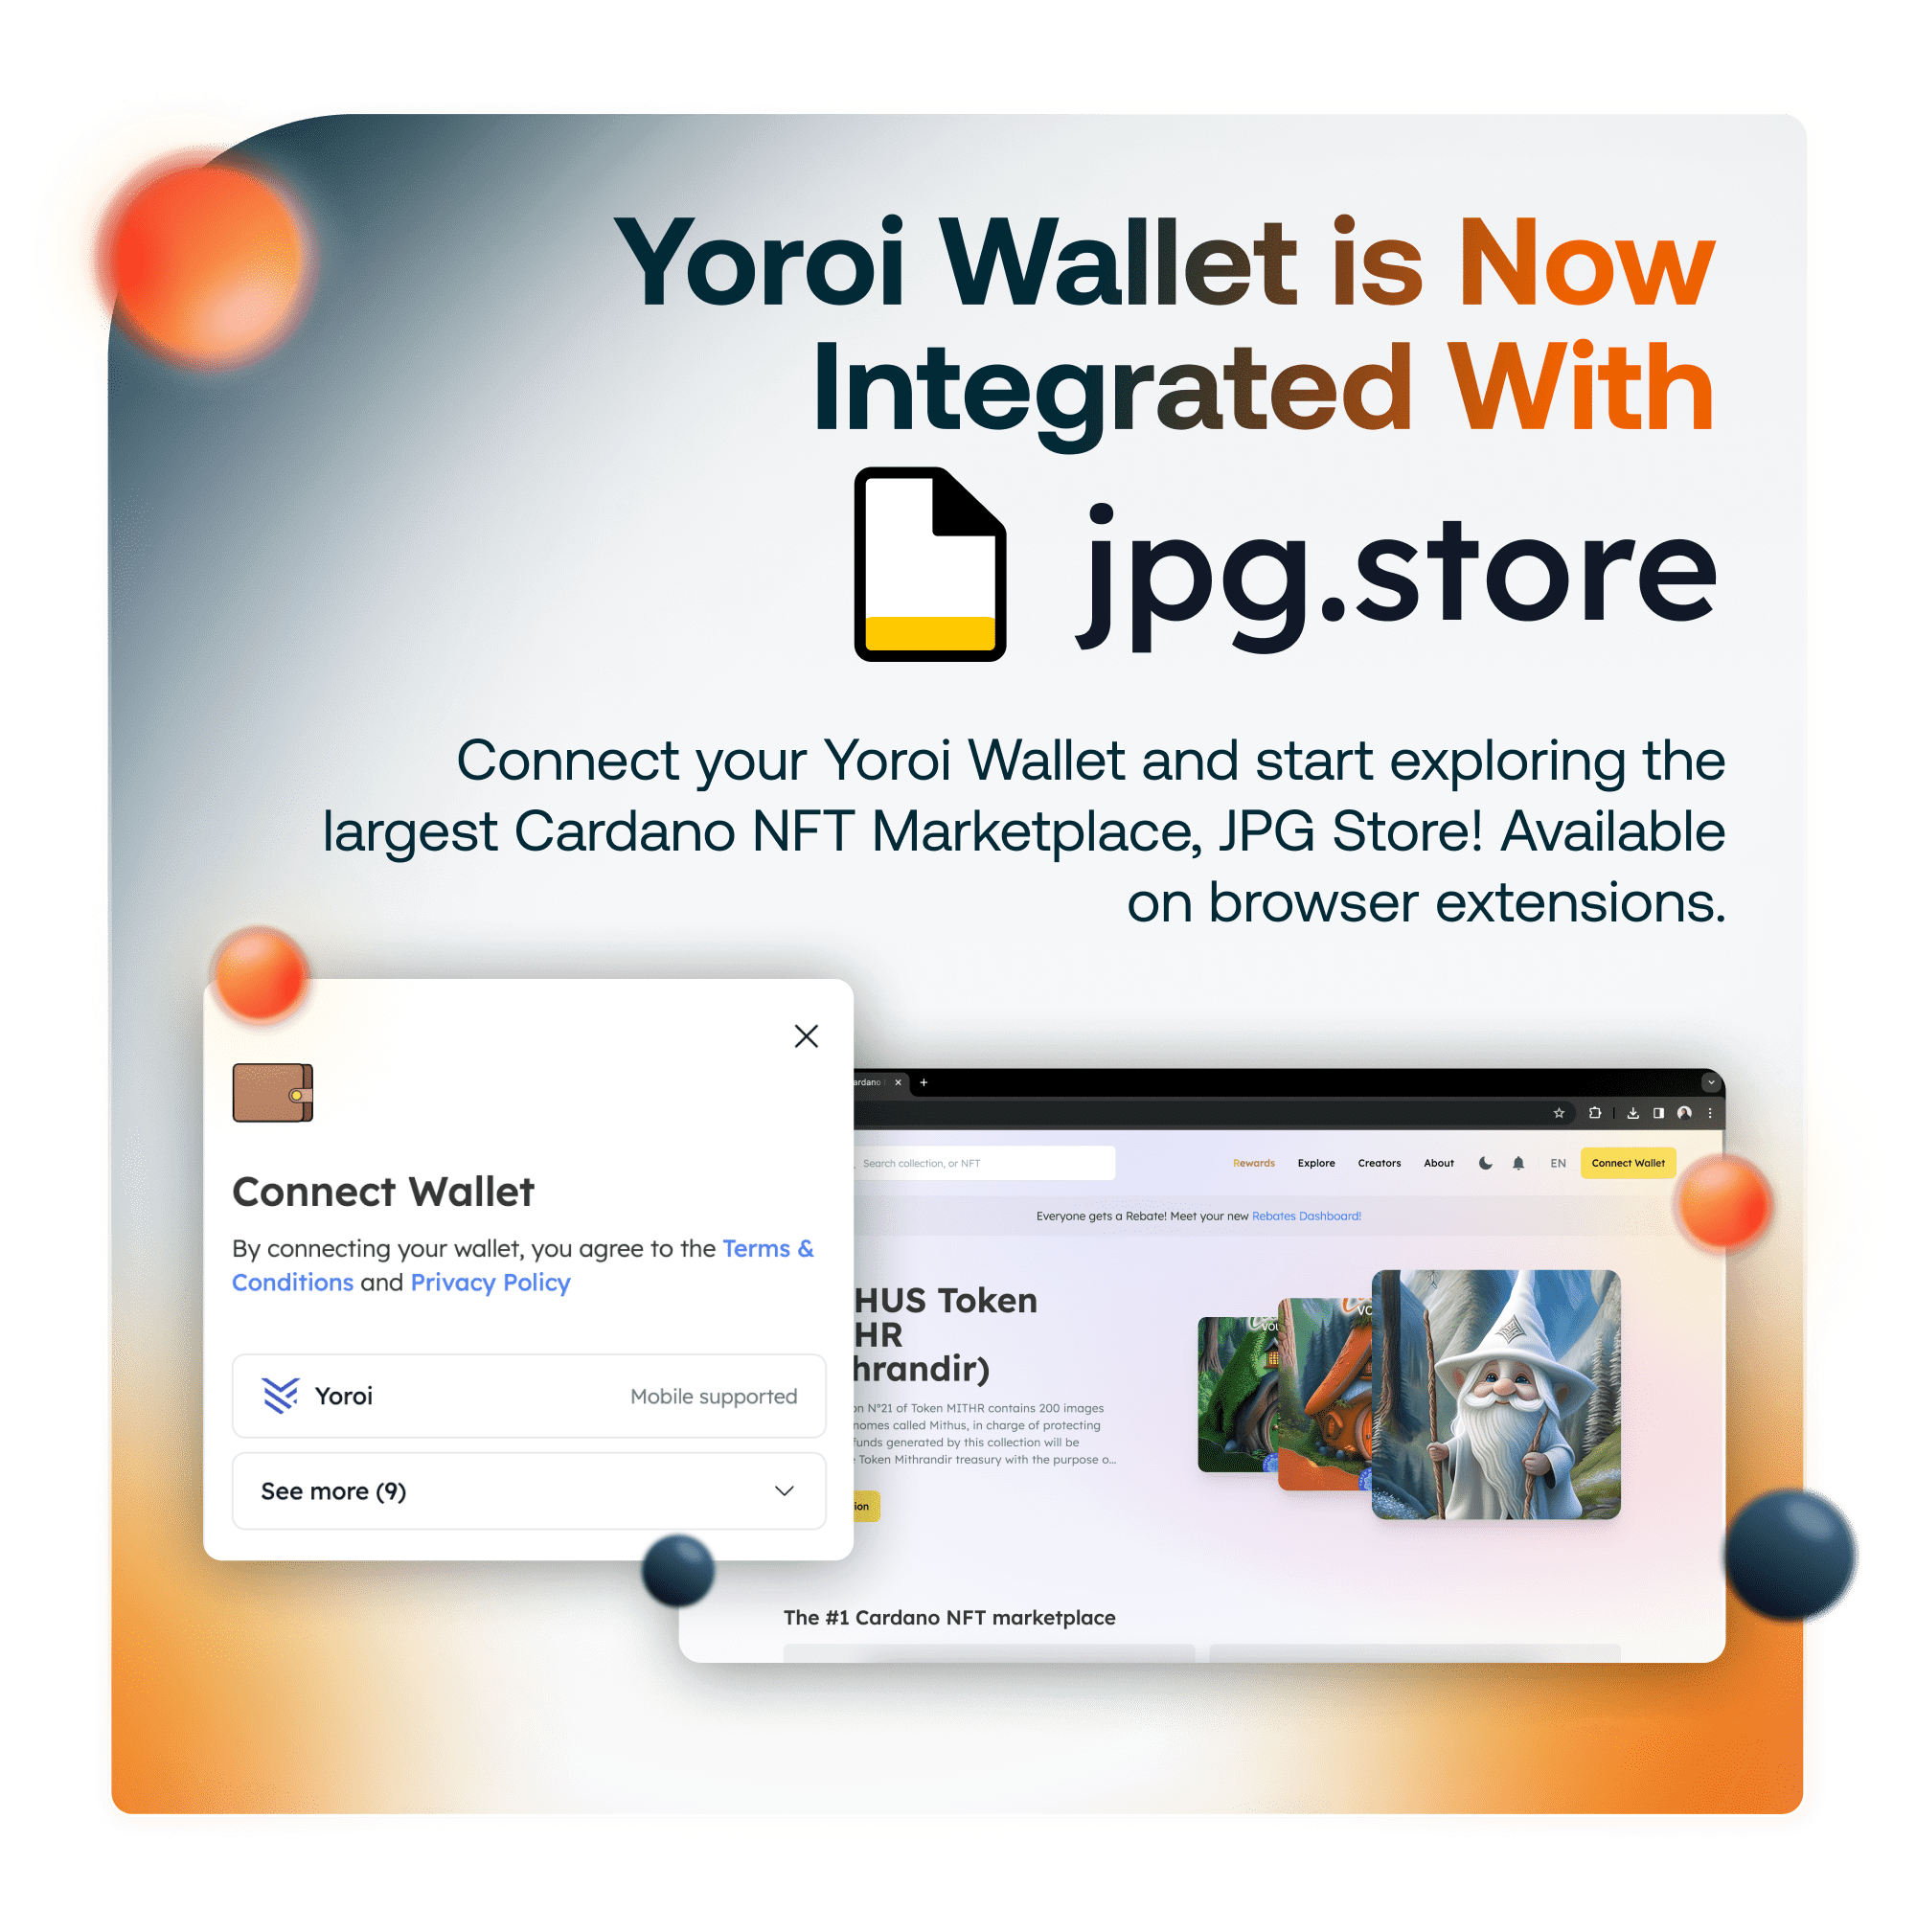 4 Blog Yoroi Wallet Is Now Integrated With JPGStore